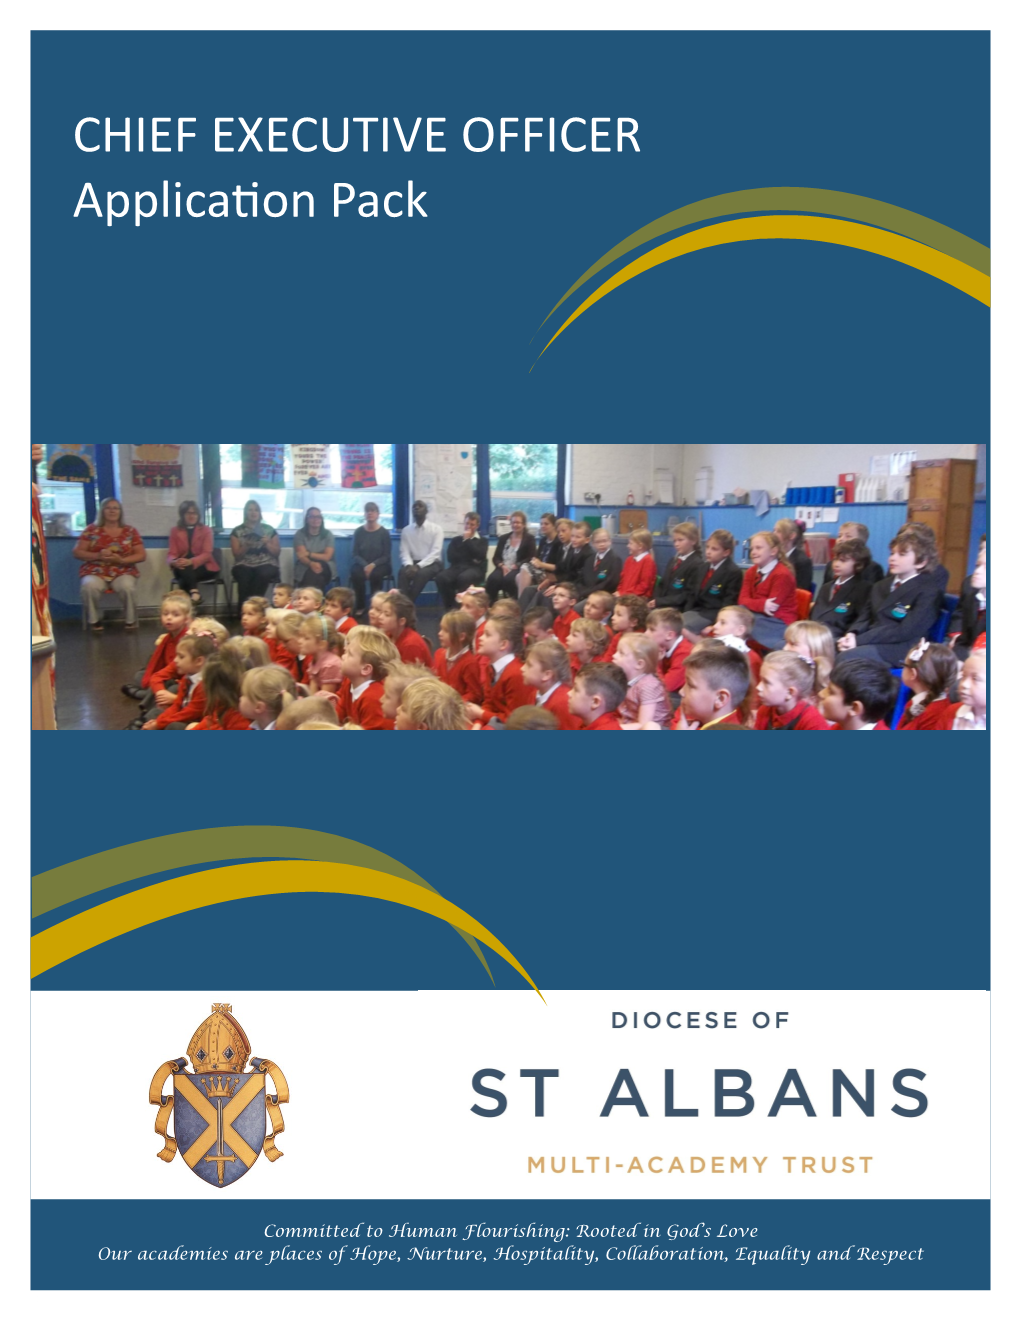 The Diocese of St Albans Multi-Academy Trust